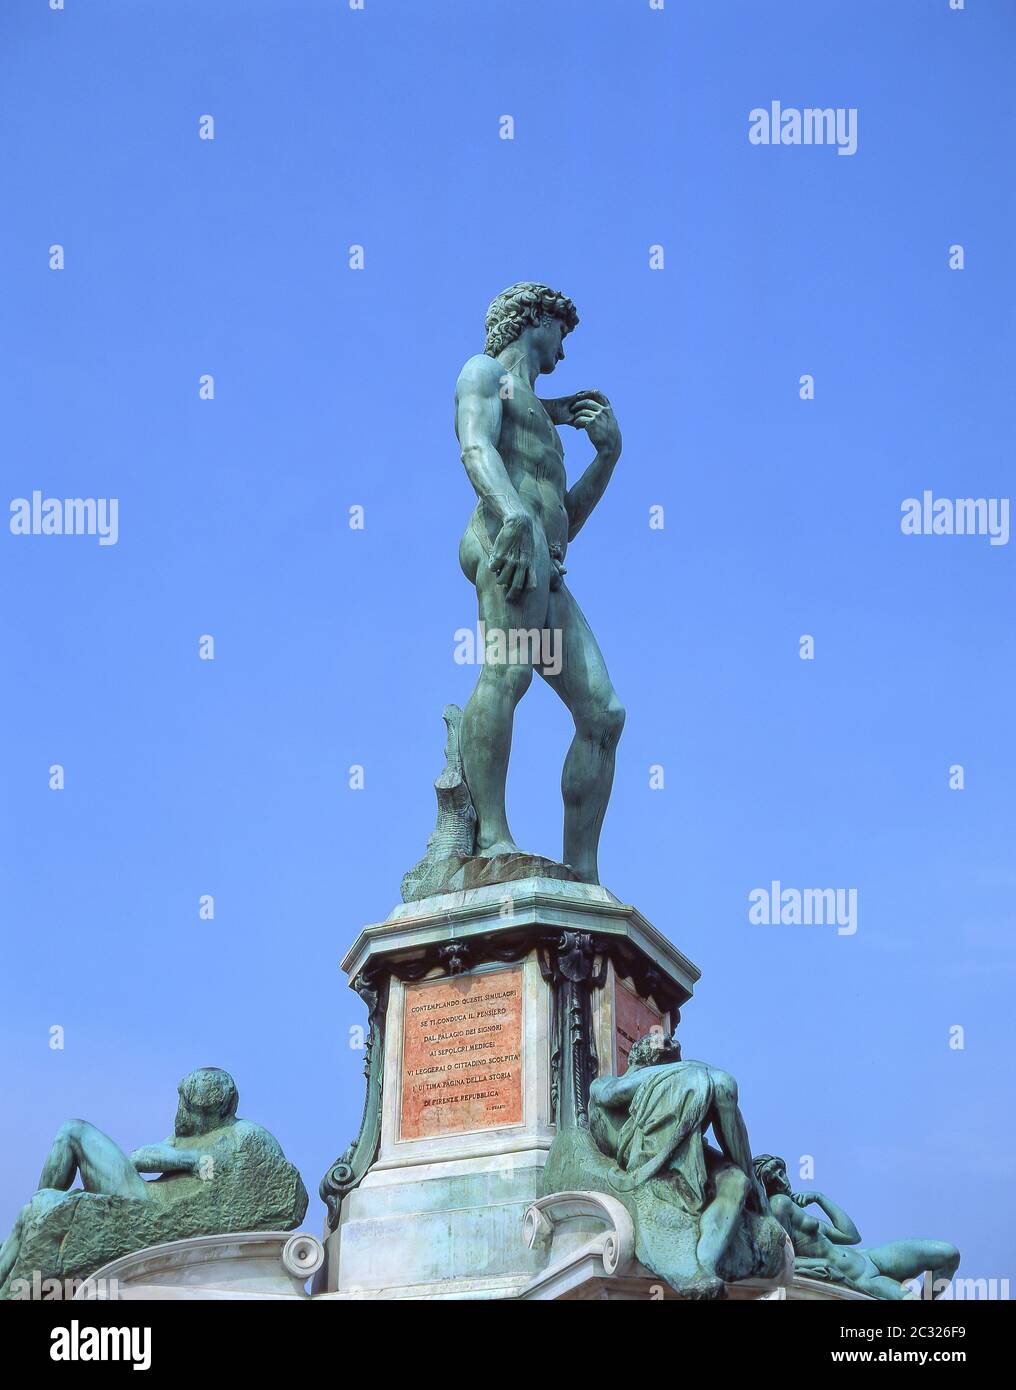 Michelangelo's 'Statue of David' on Piazzale Michelangelo, Florence (Firenze), Tuscany Region, Italy Stock Photo